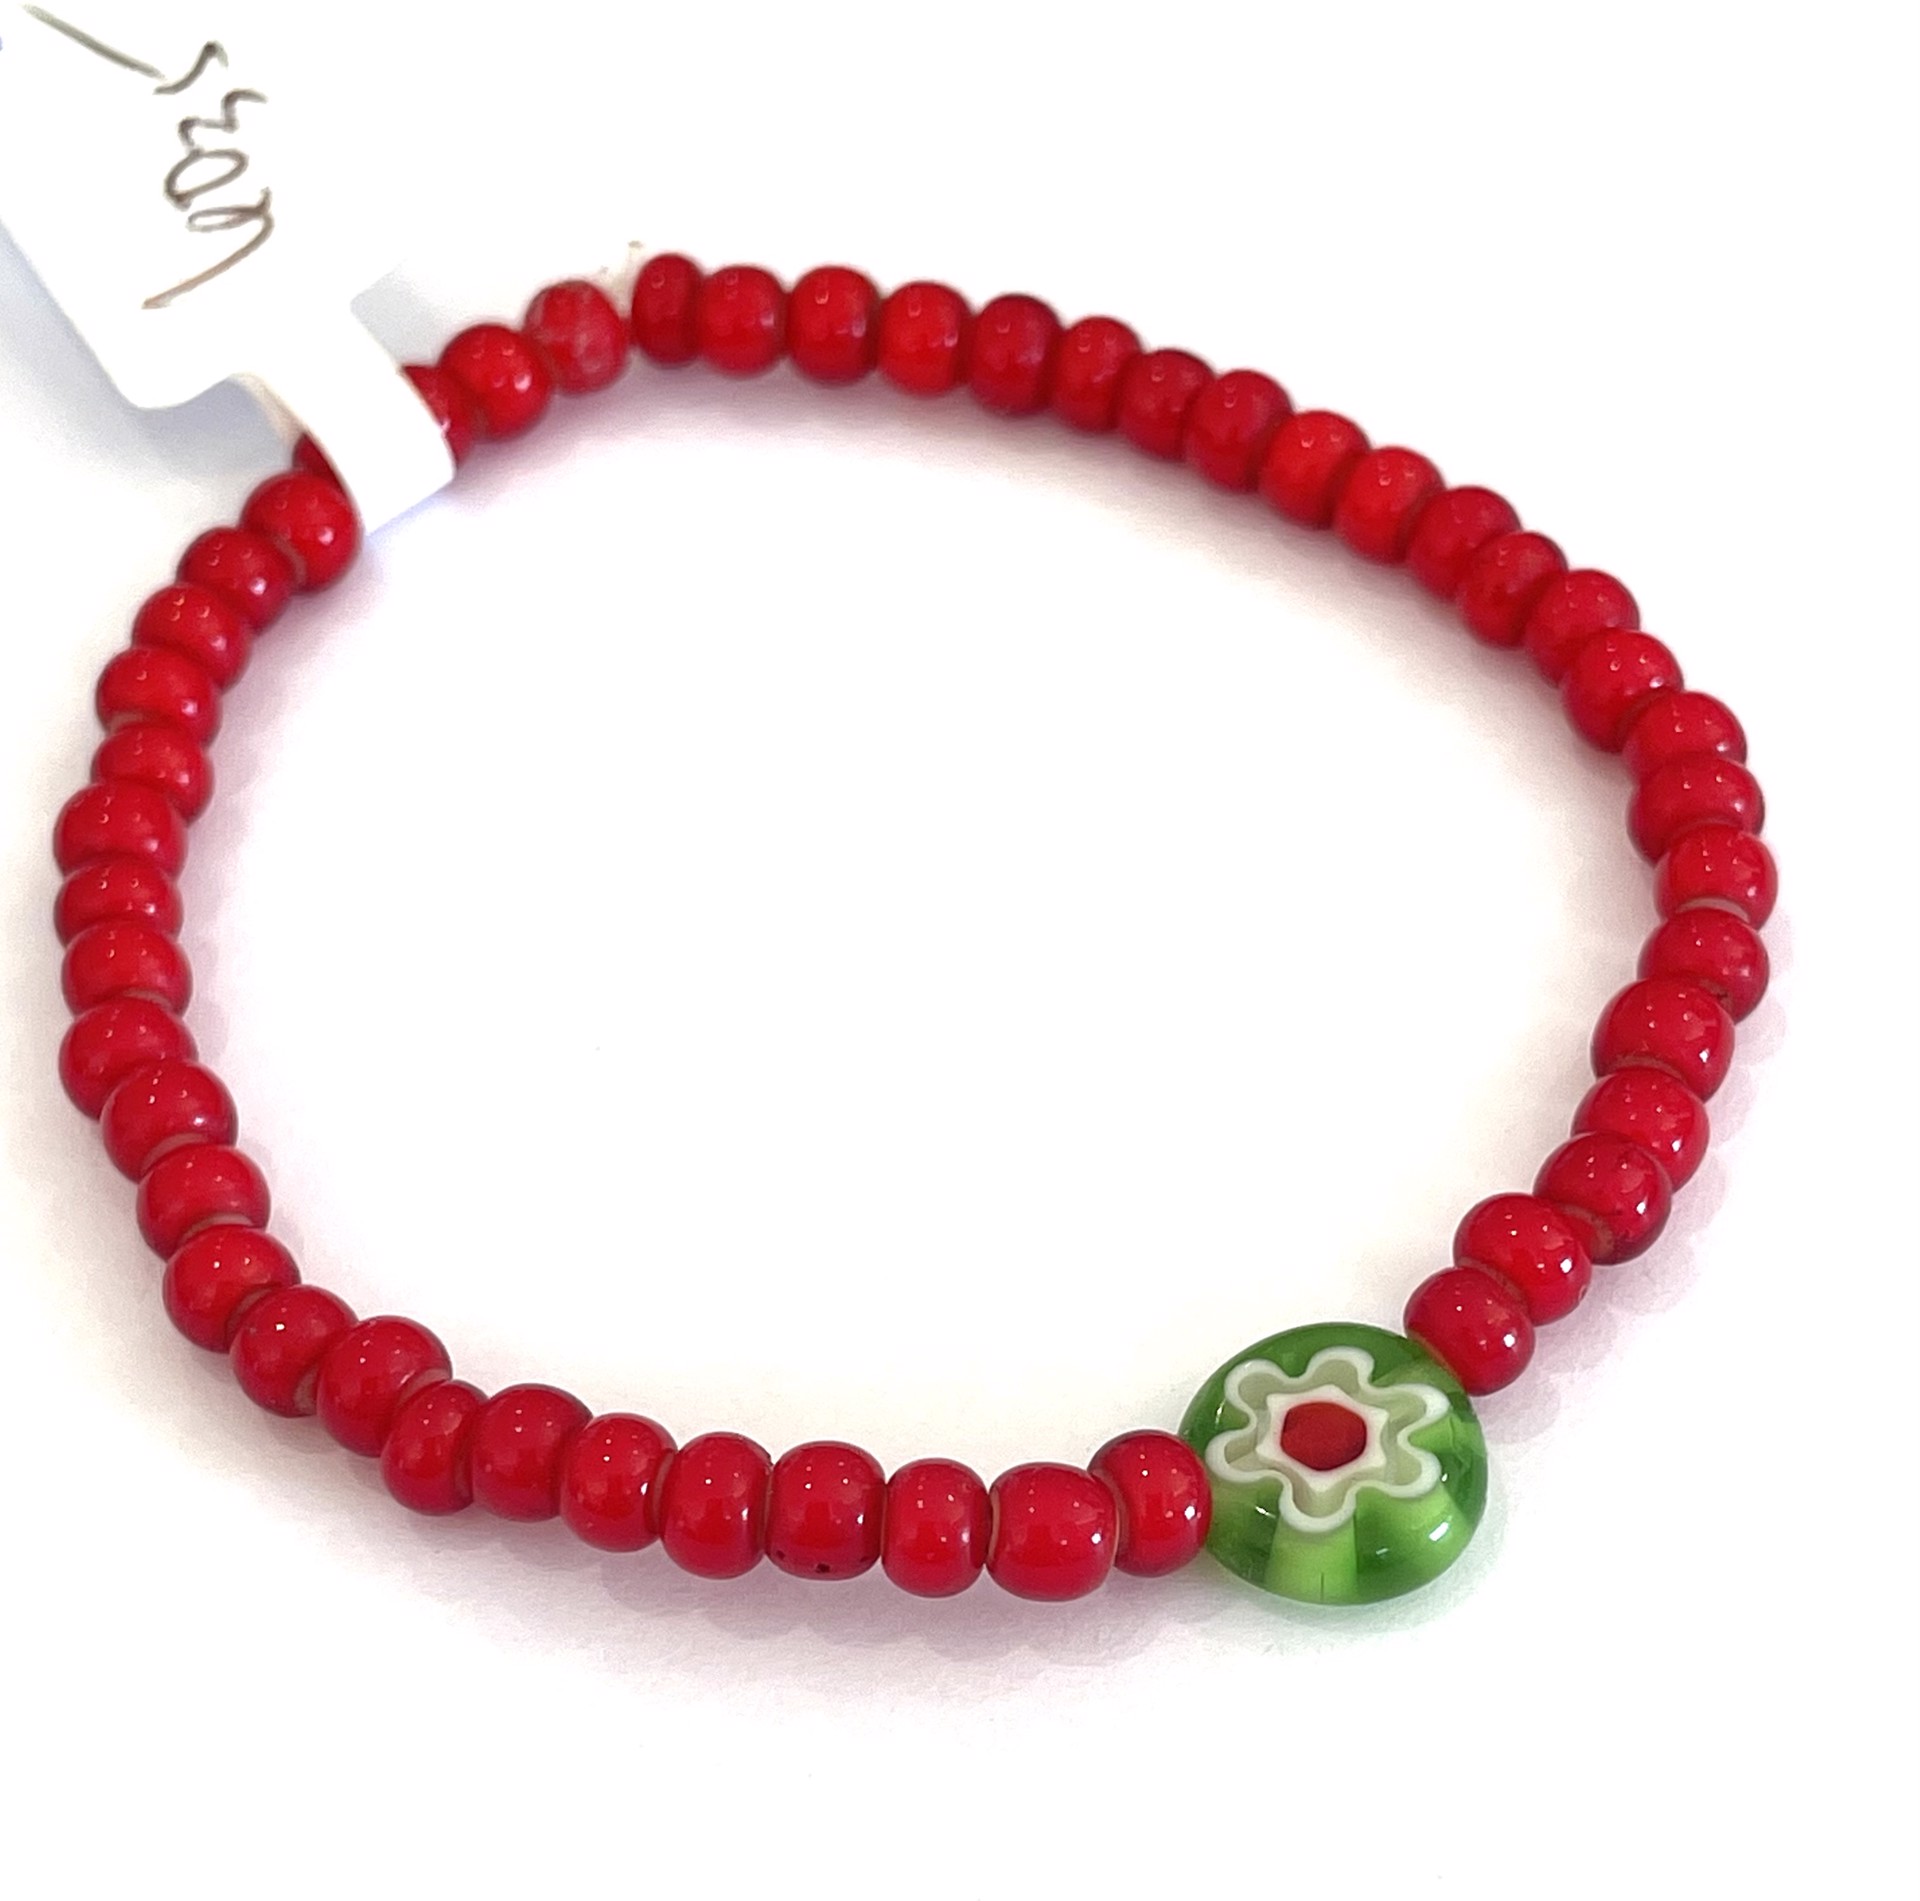 Murine Flower and Red Beads by Emelie Hebert